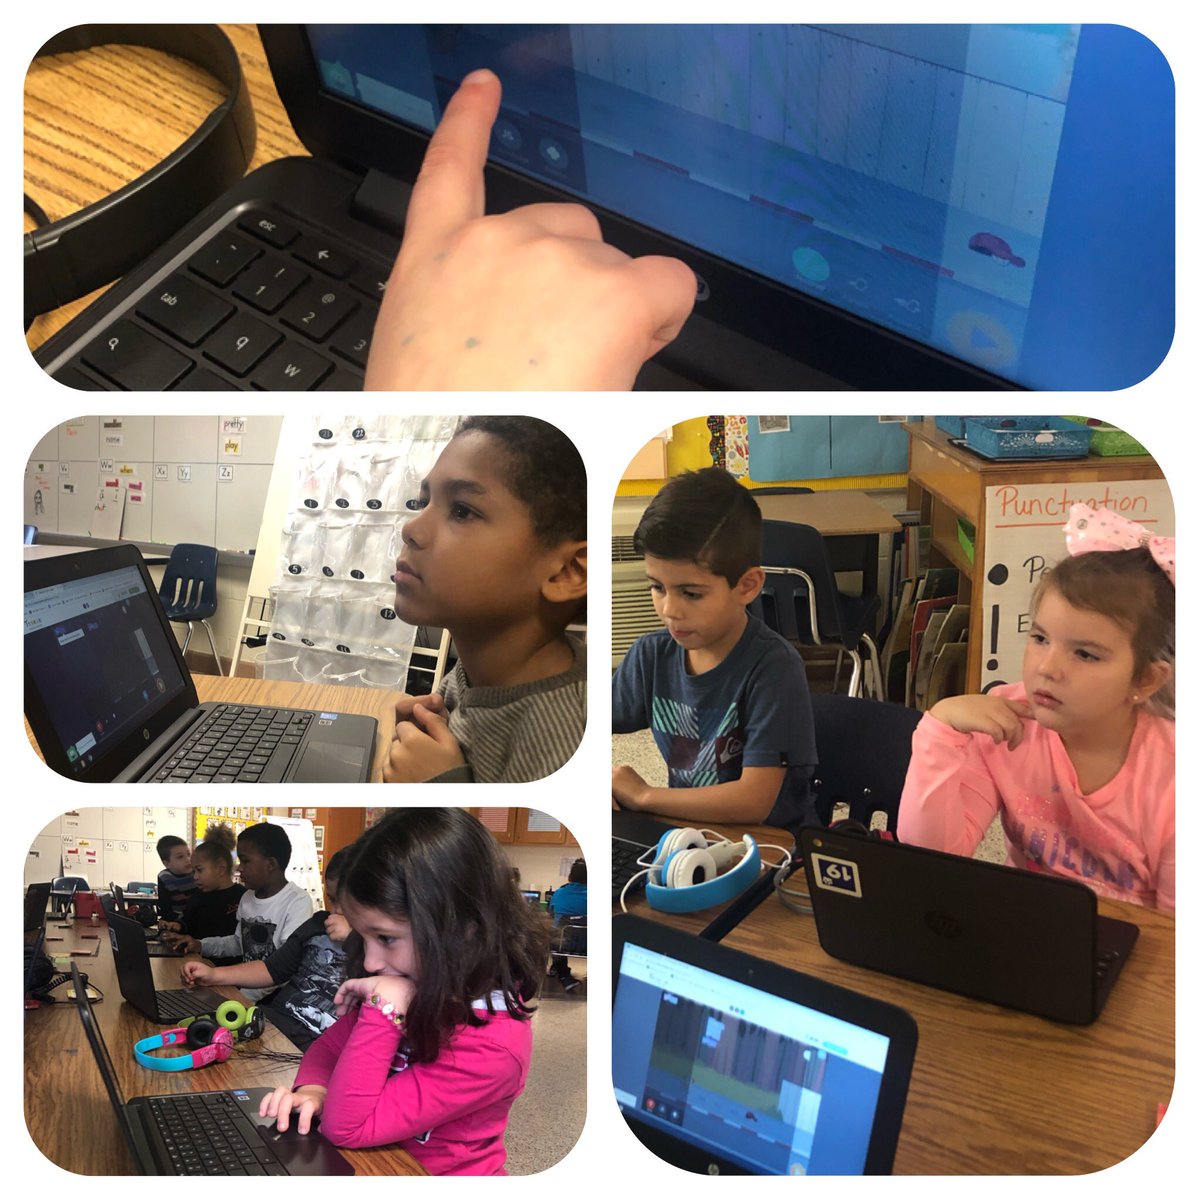 We are enjoying Hour of Code!@PointOViewES @drherber @JohnChowns #hourofcode2018